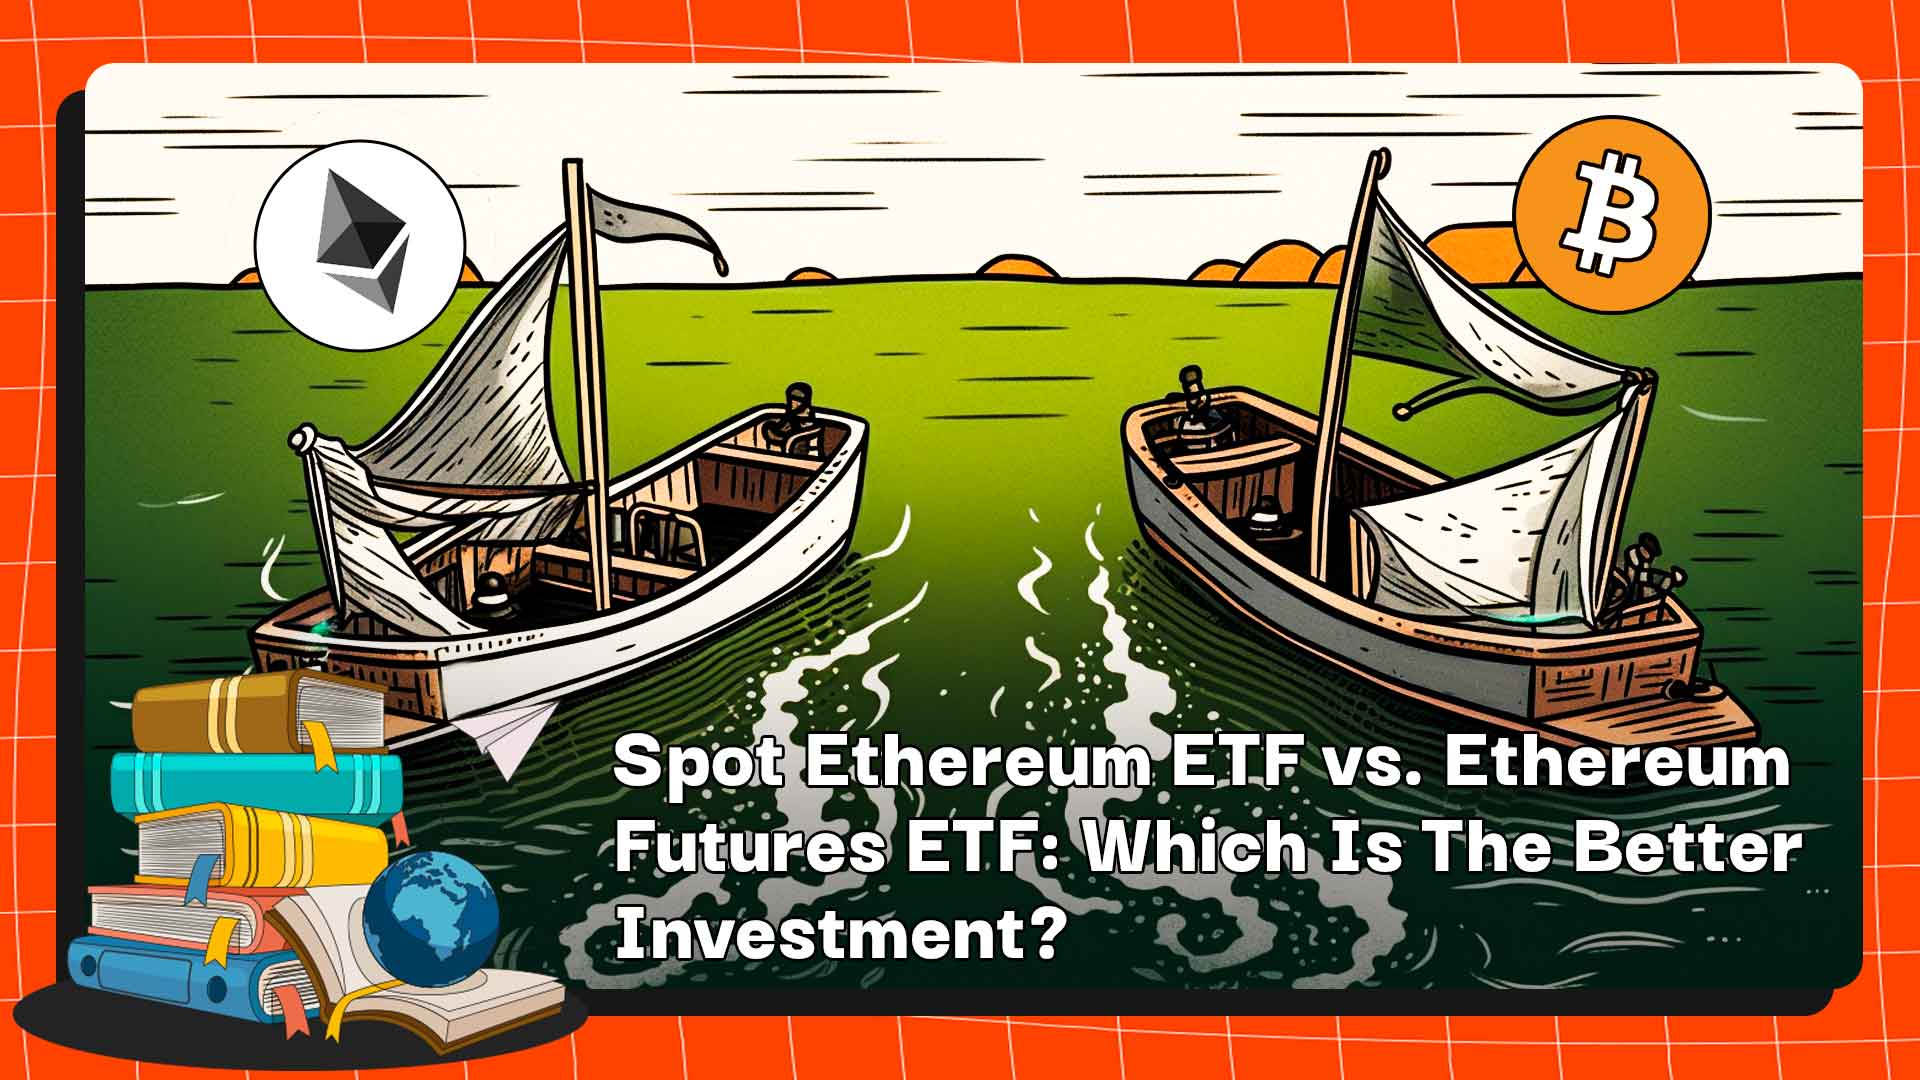 Spot Ethereum ETF vs. Ethereum Futures ETF: Which Is The Better Investment?